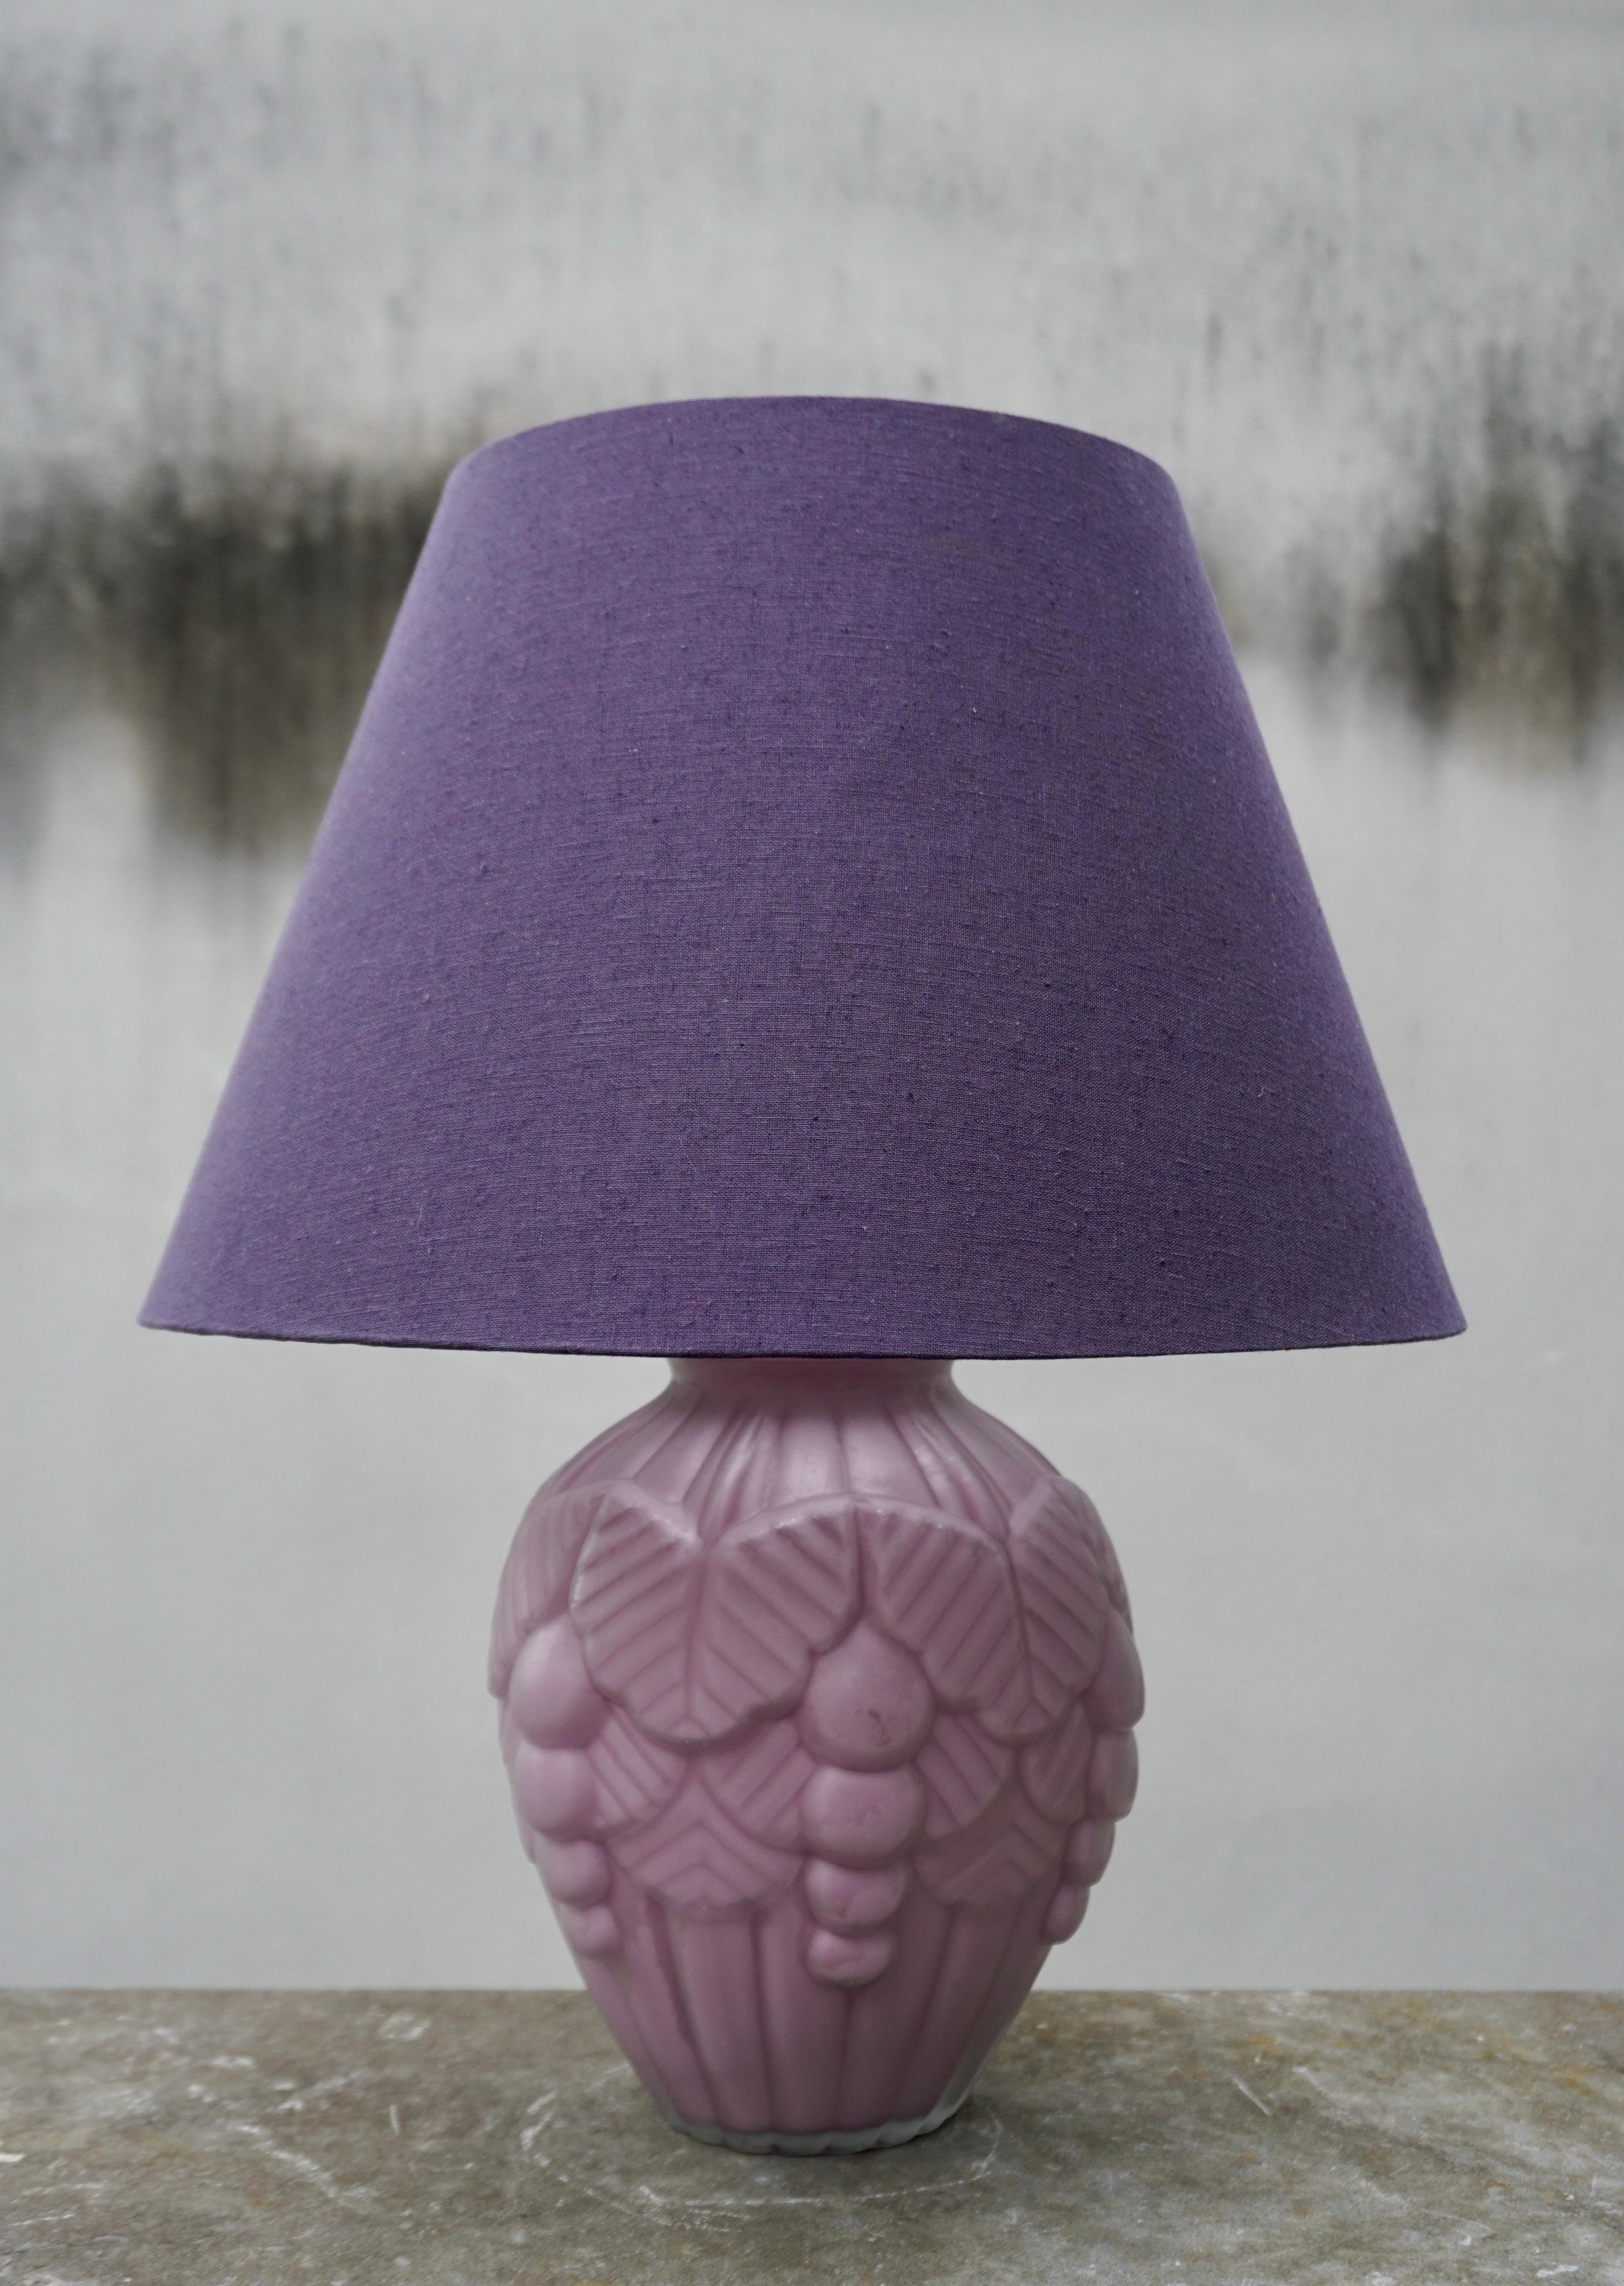 Art Deco table lamp in pressed lilac glass.

One of the most beautiful French lamps in pressed old lilac glass with the most beautiful 3D pattern from the 1920s. An absolutely wonderfully beautiful and rarely found table lamp. Place it in a place